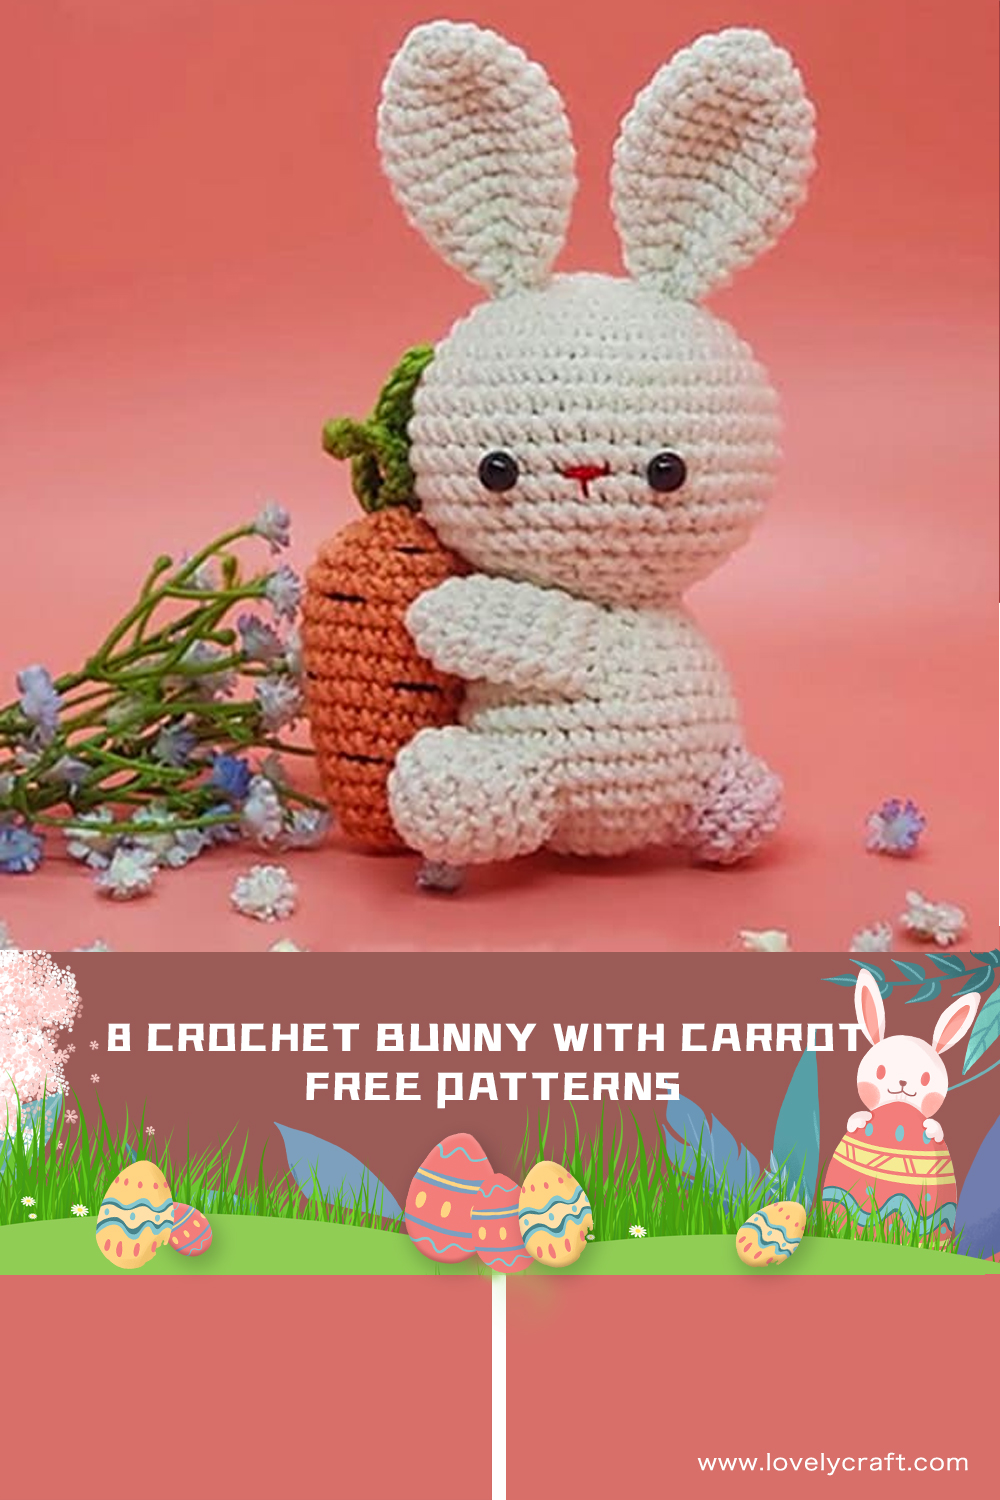 8 Crochet Bunny with Carrot FREE Patterns